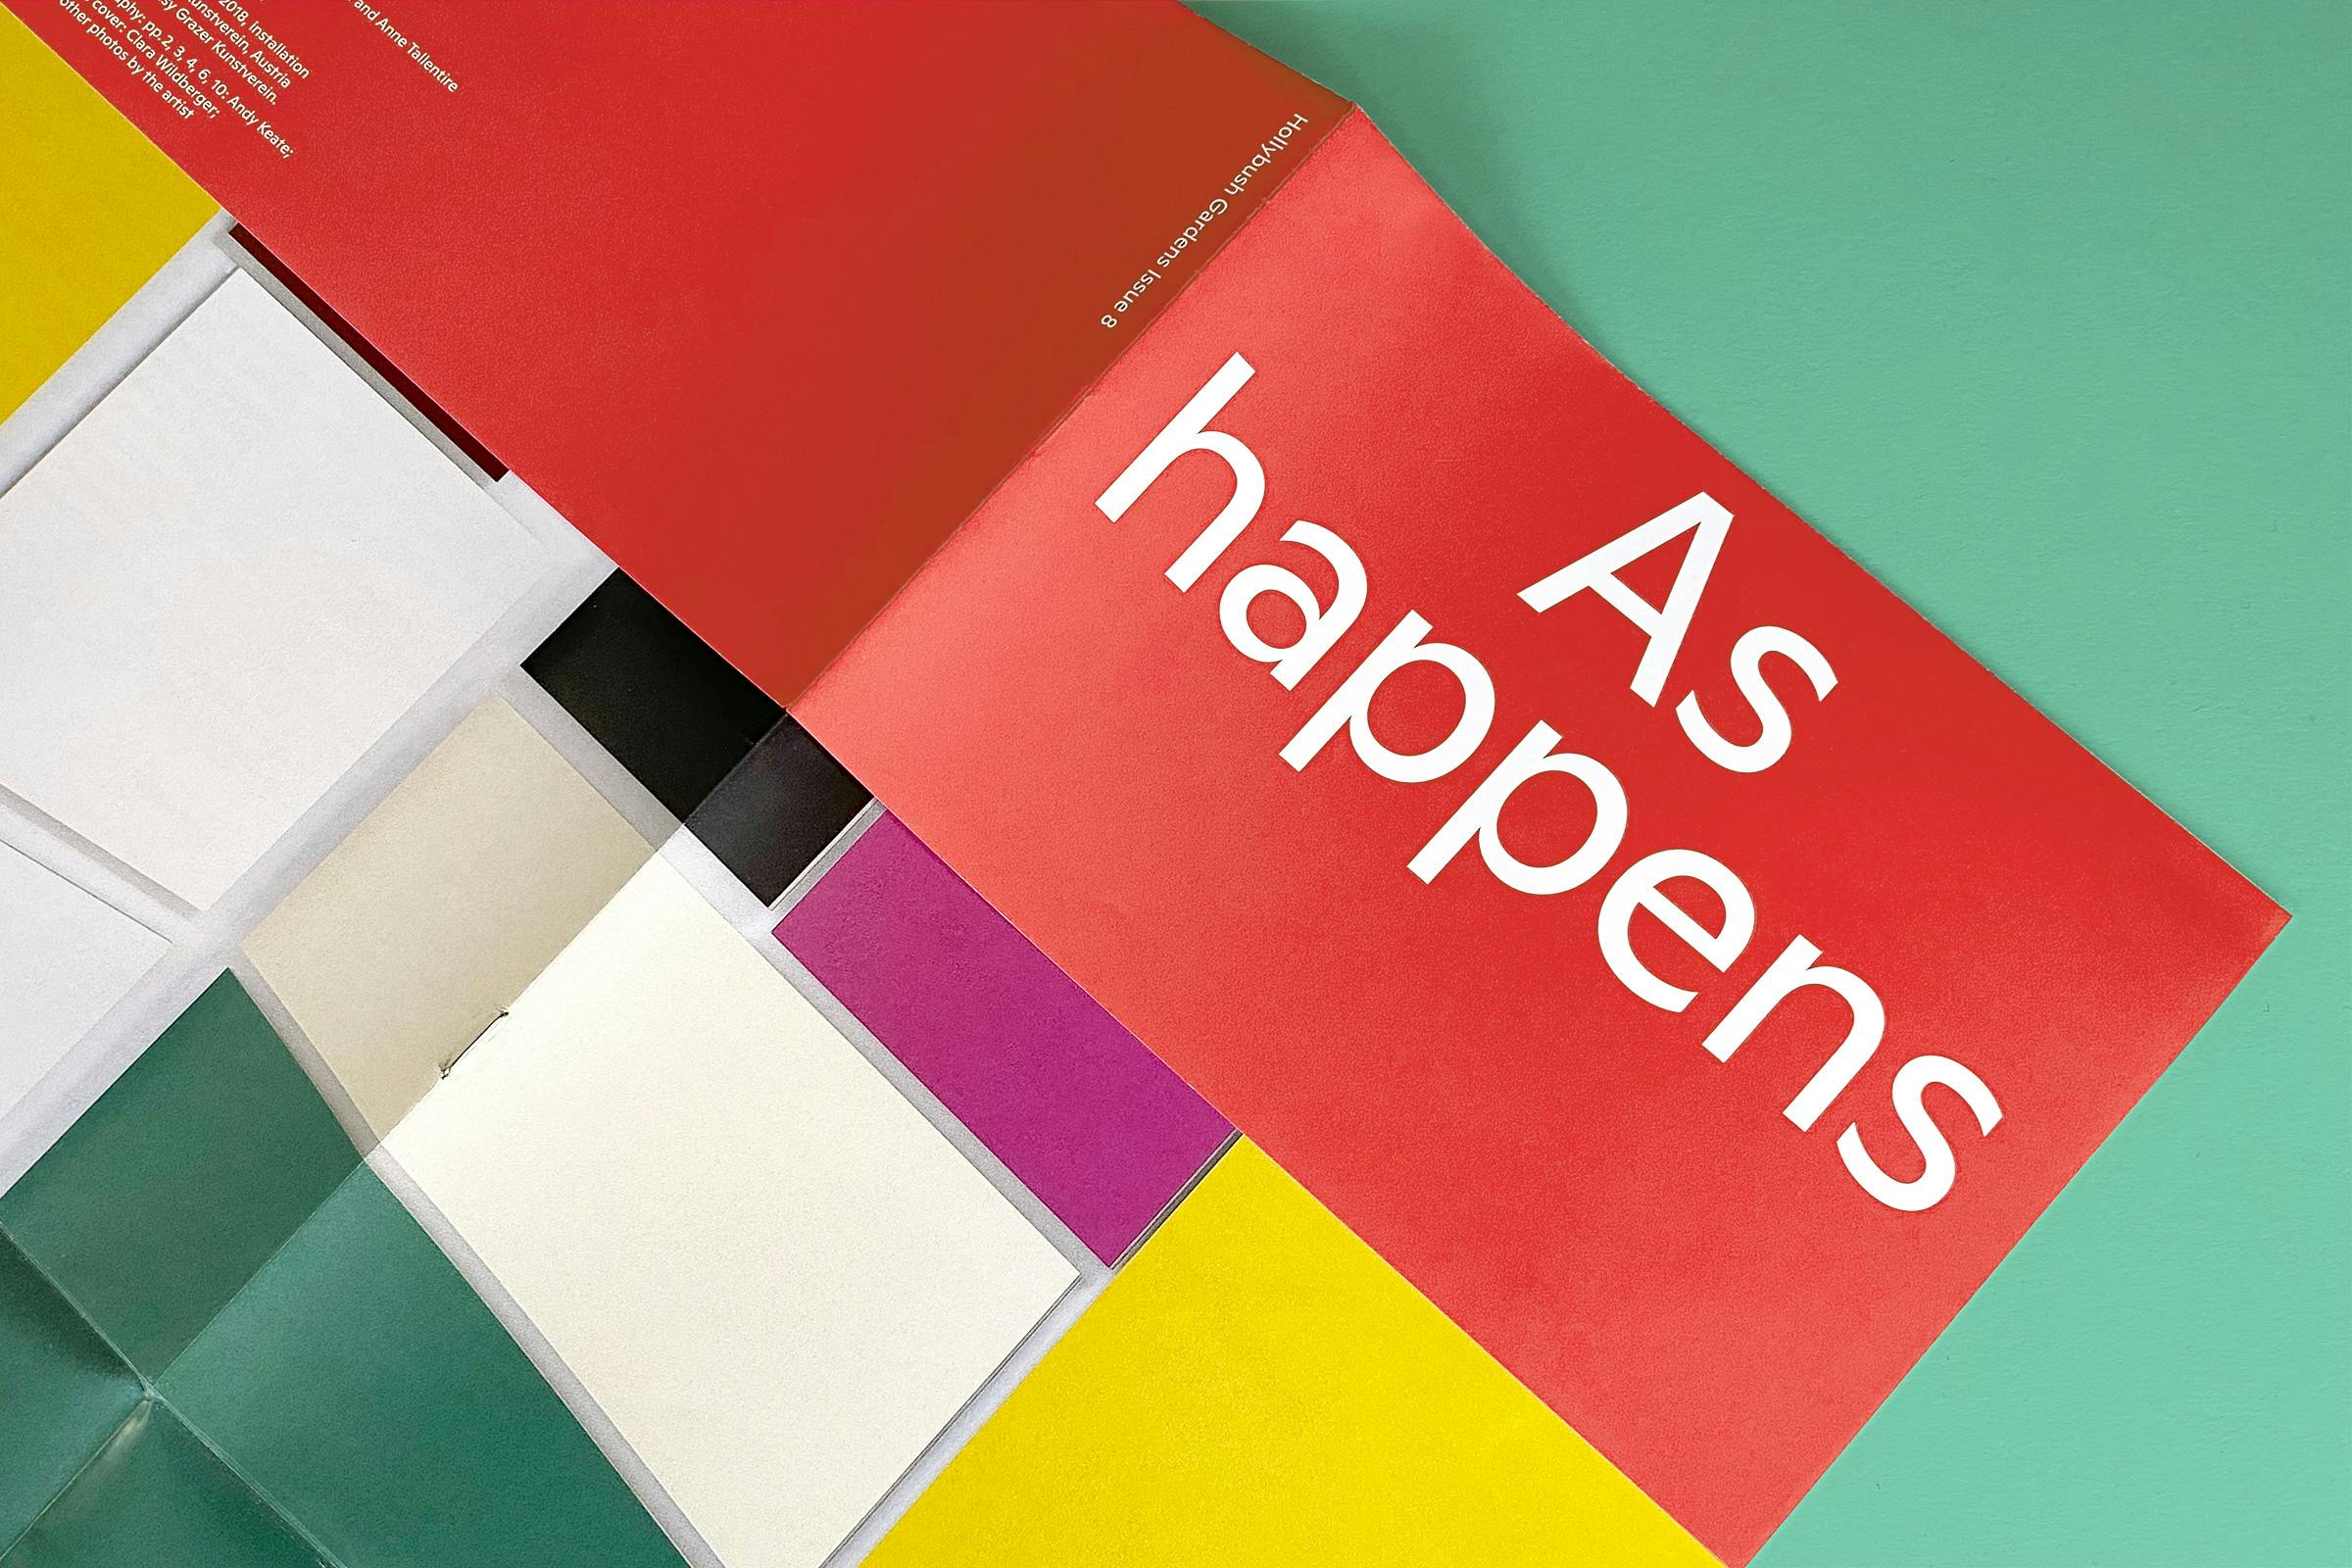 Hollybush Gardens, Anne Tallentire: As happens, Print, Graphic Design by Wolfe Hall